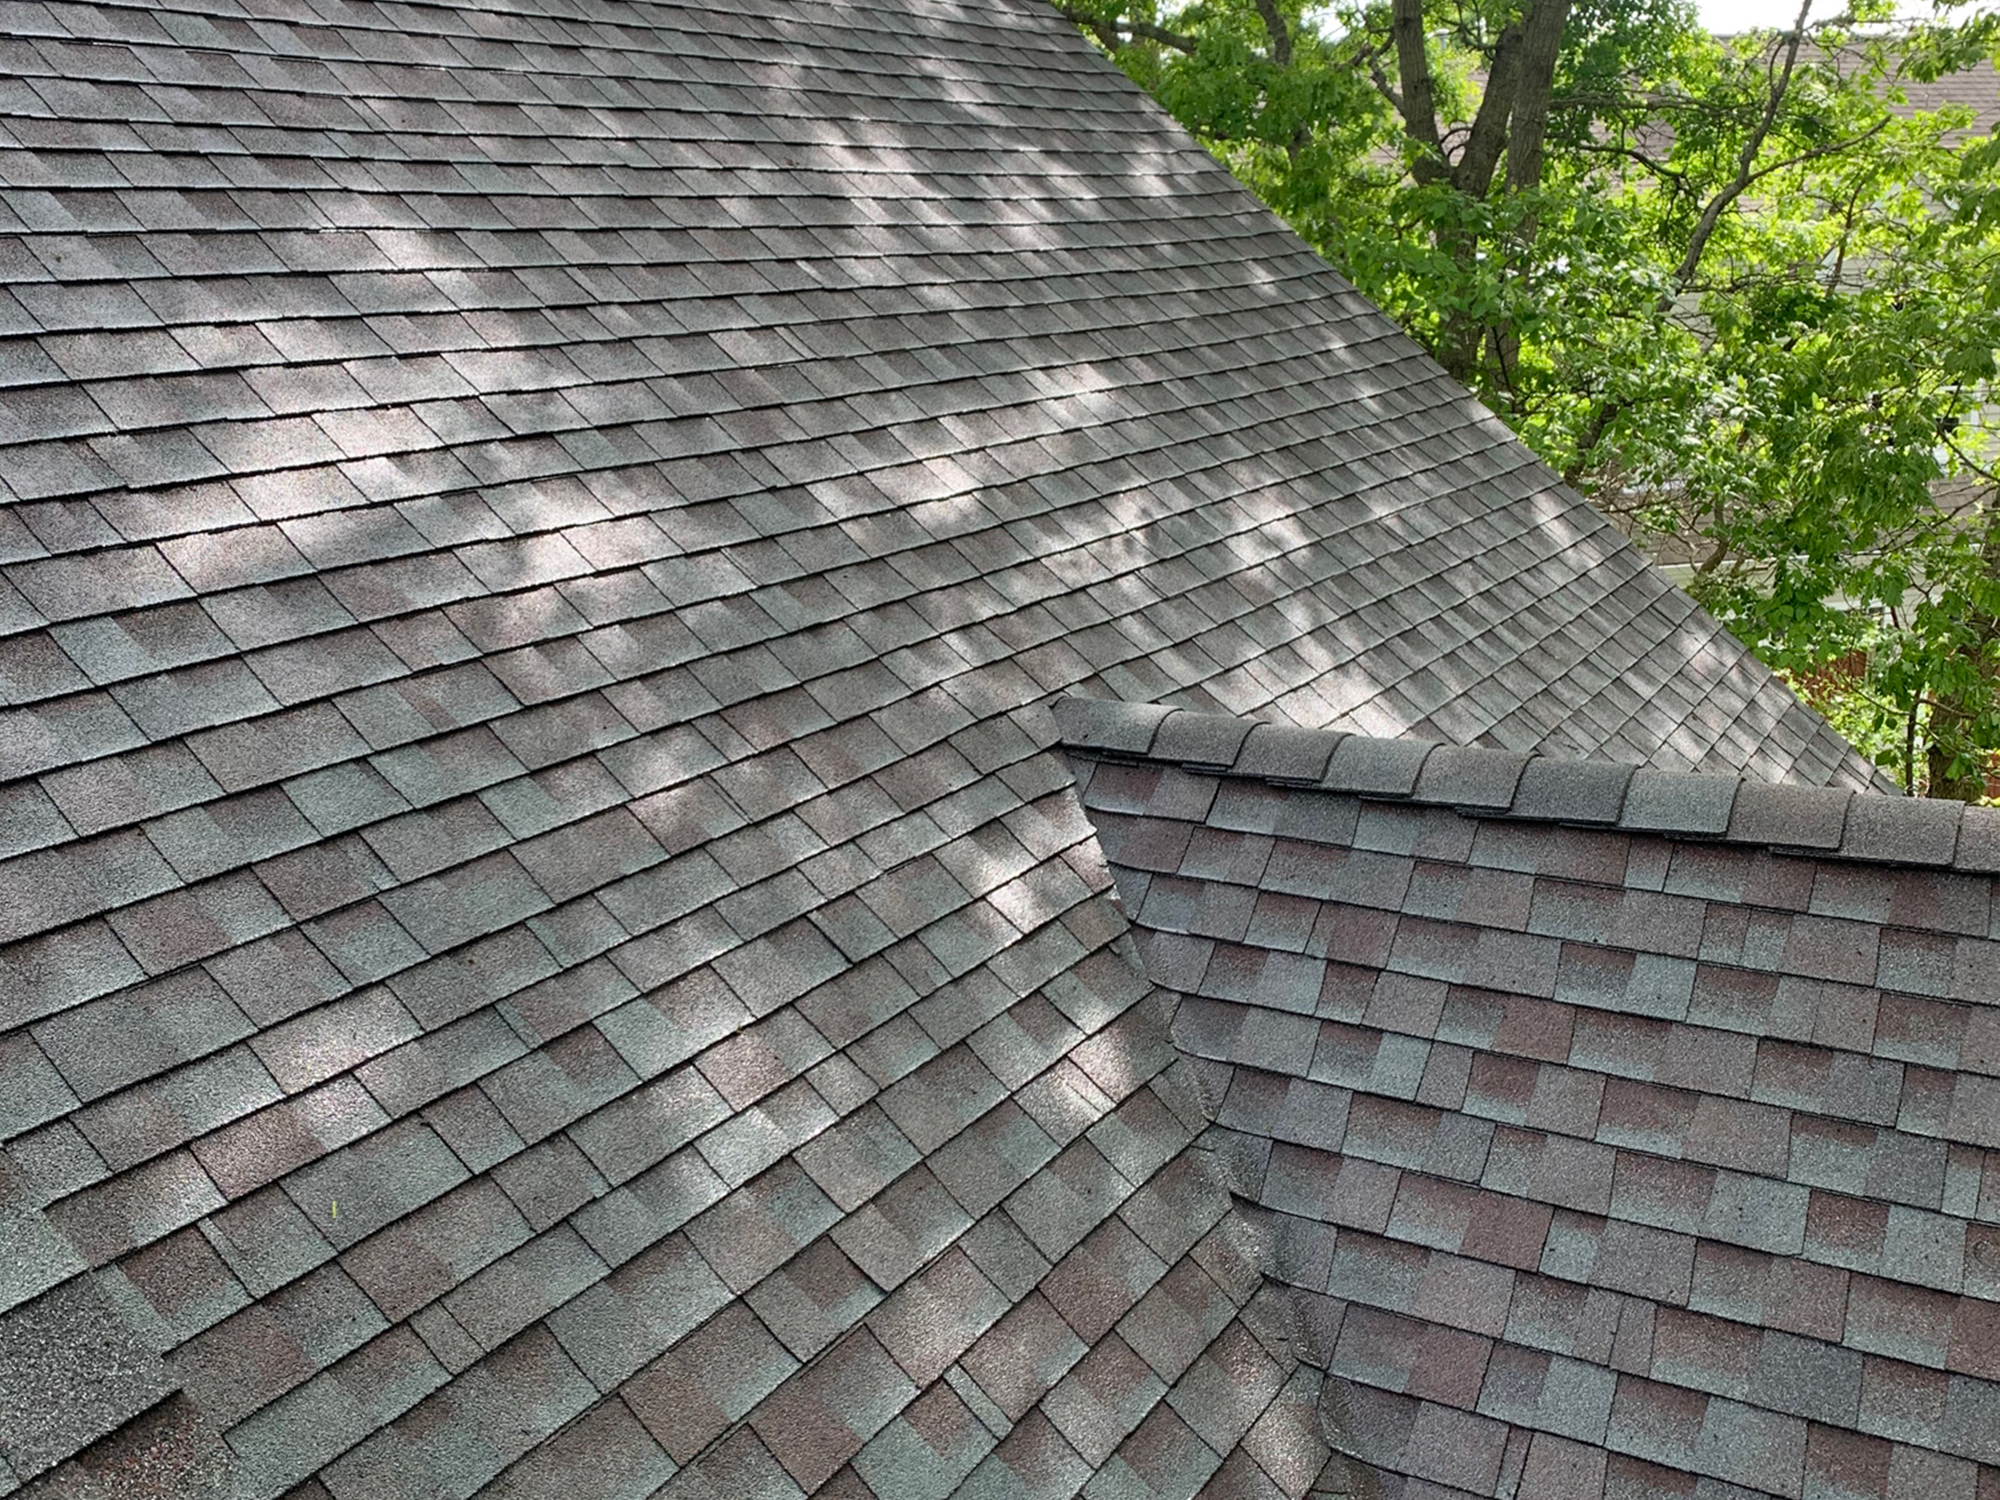 roof after cleaning